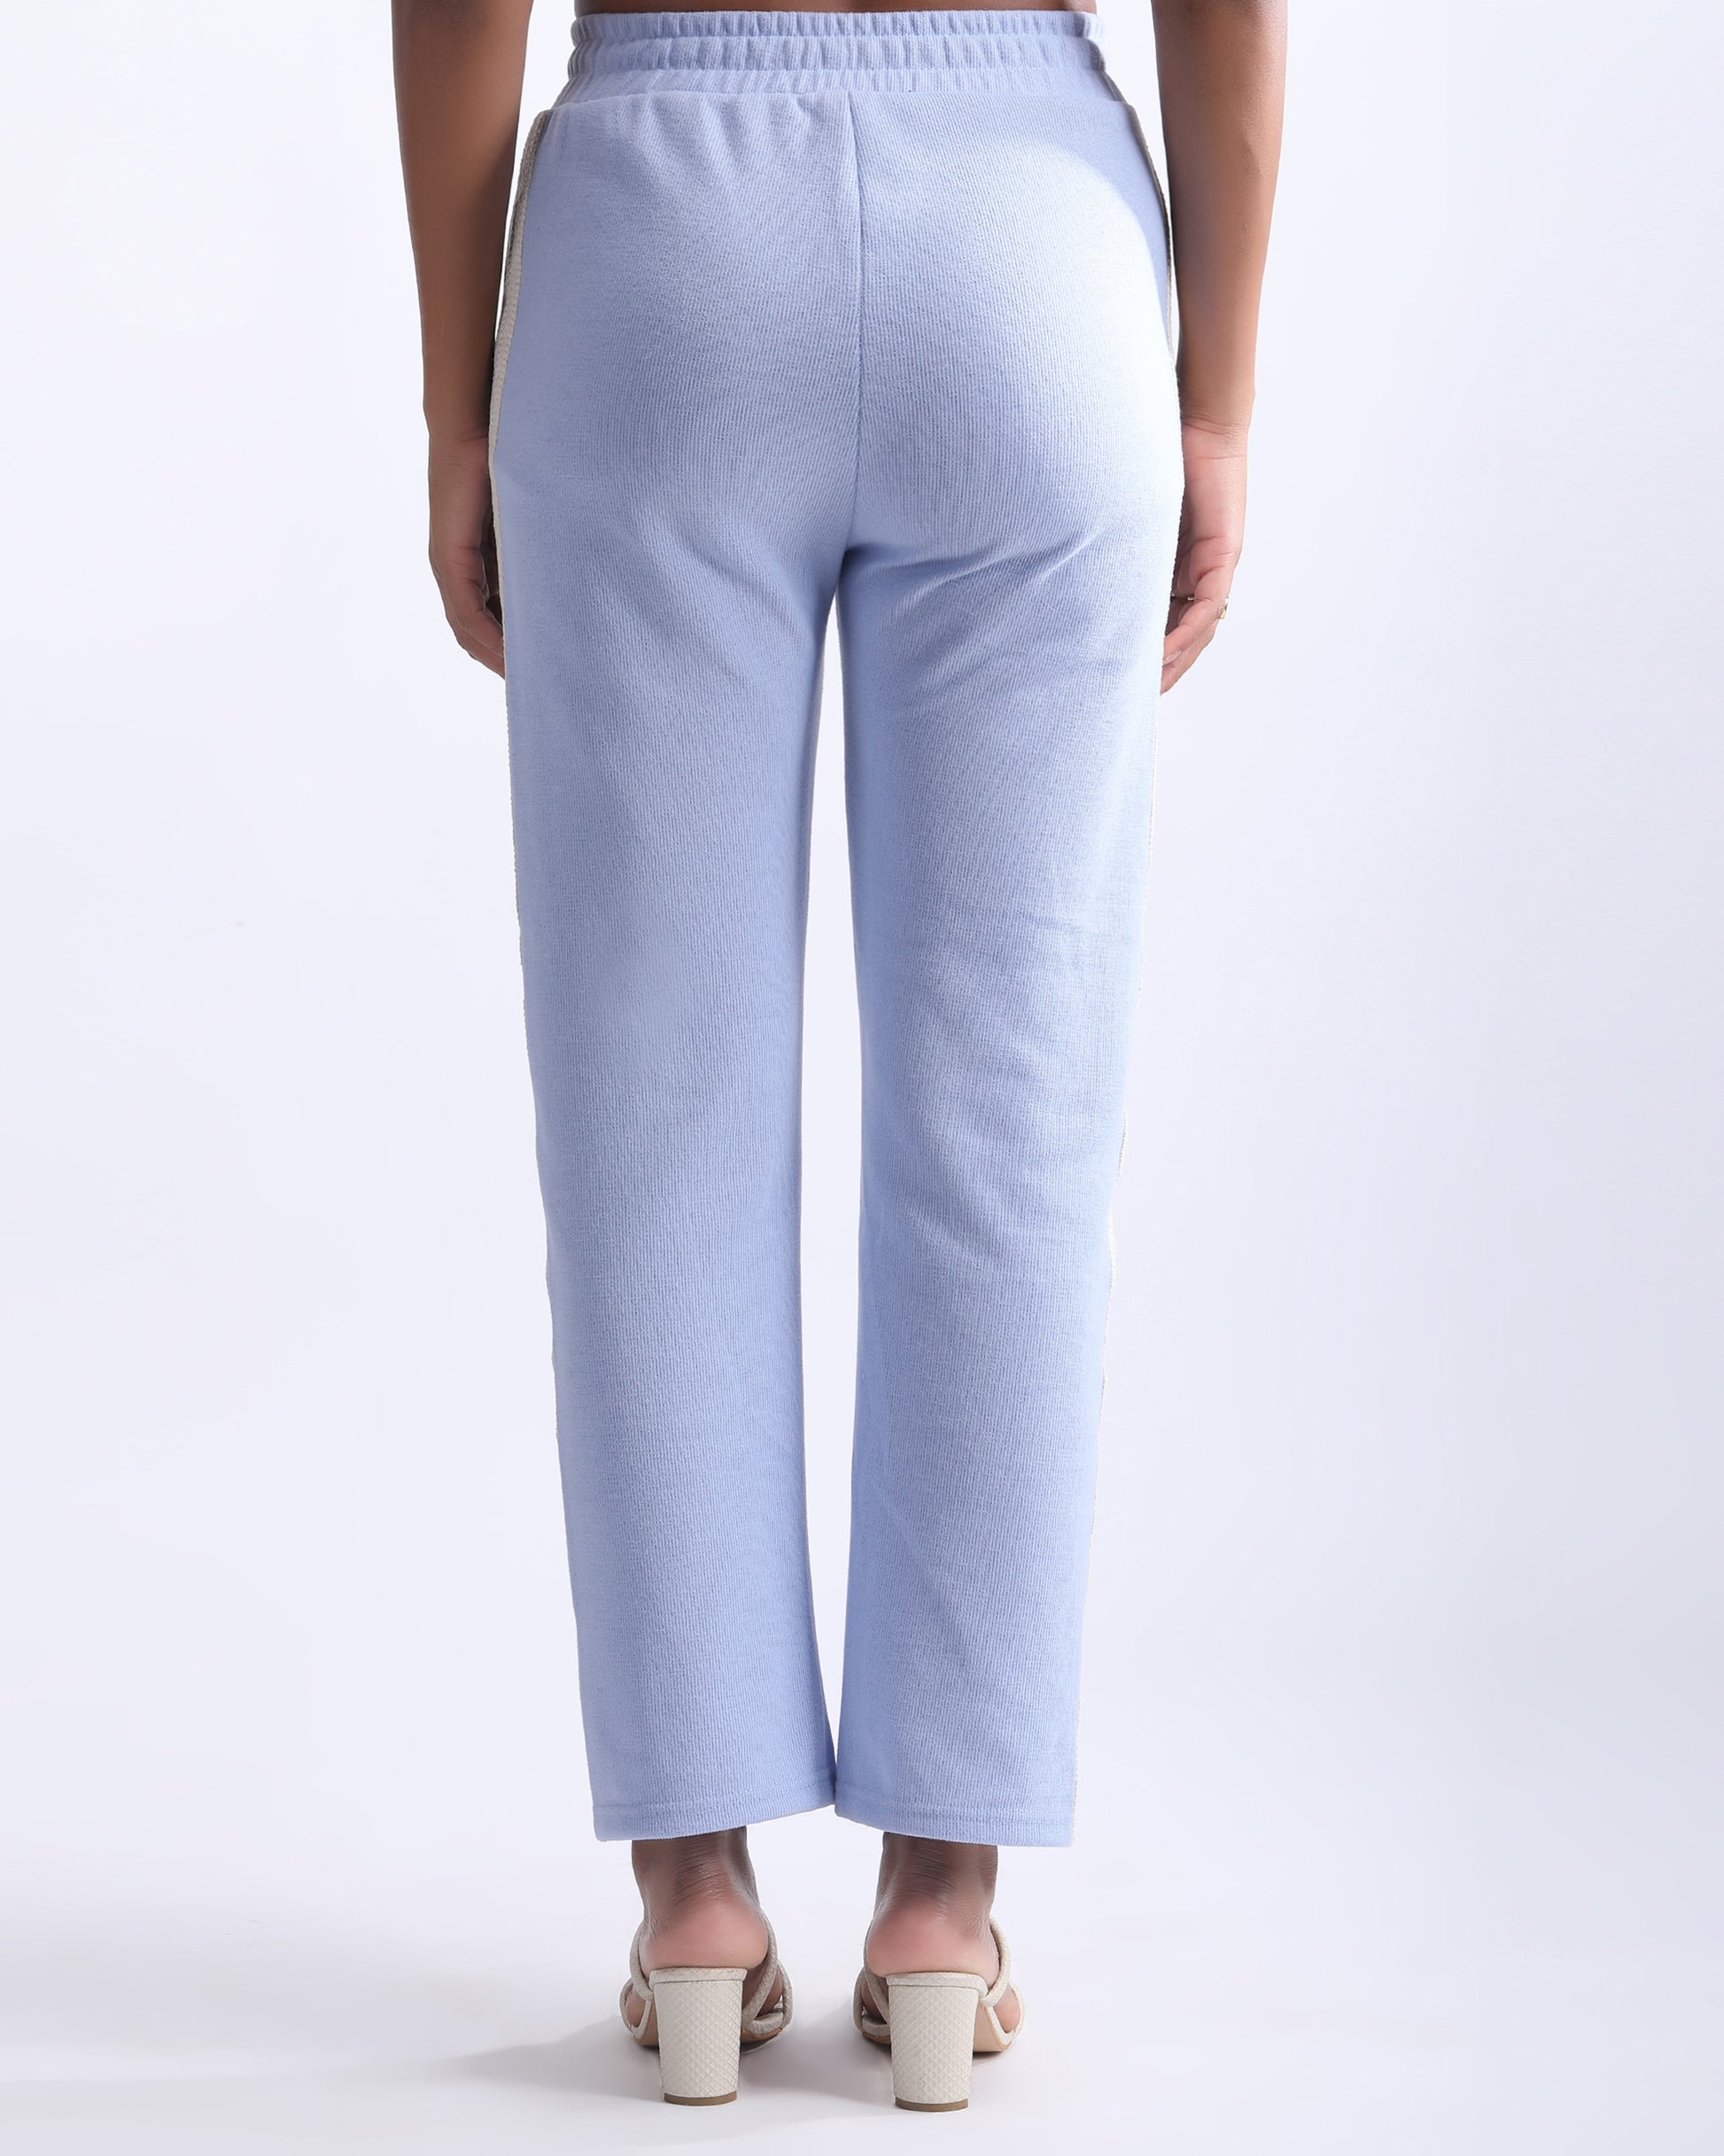 HIGH RISE LOUNGE TROUSER,blue, bottomwear, full length, high rise, knitted, lace, loungewear, relaxed fit, ribbed, trousers, wide leg,high-rise-lounge-trouser-blue,Color- Blue  
Fit- Straight Fit 
Length- Full 
Waist- High Rise 
Closure- Elasticated 
No. of Pockets- 2 
Fabric- Ribbed  
Print/ Pattern- Solid 
Details/Design Elements- Laced